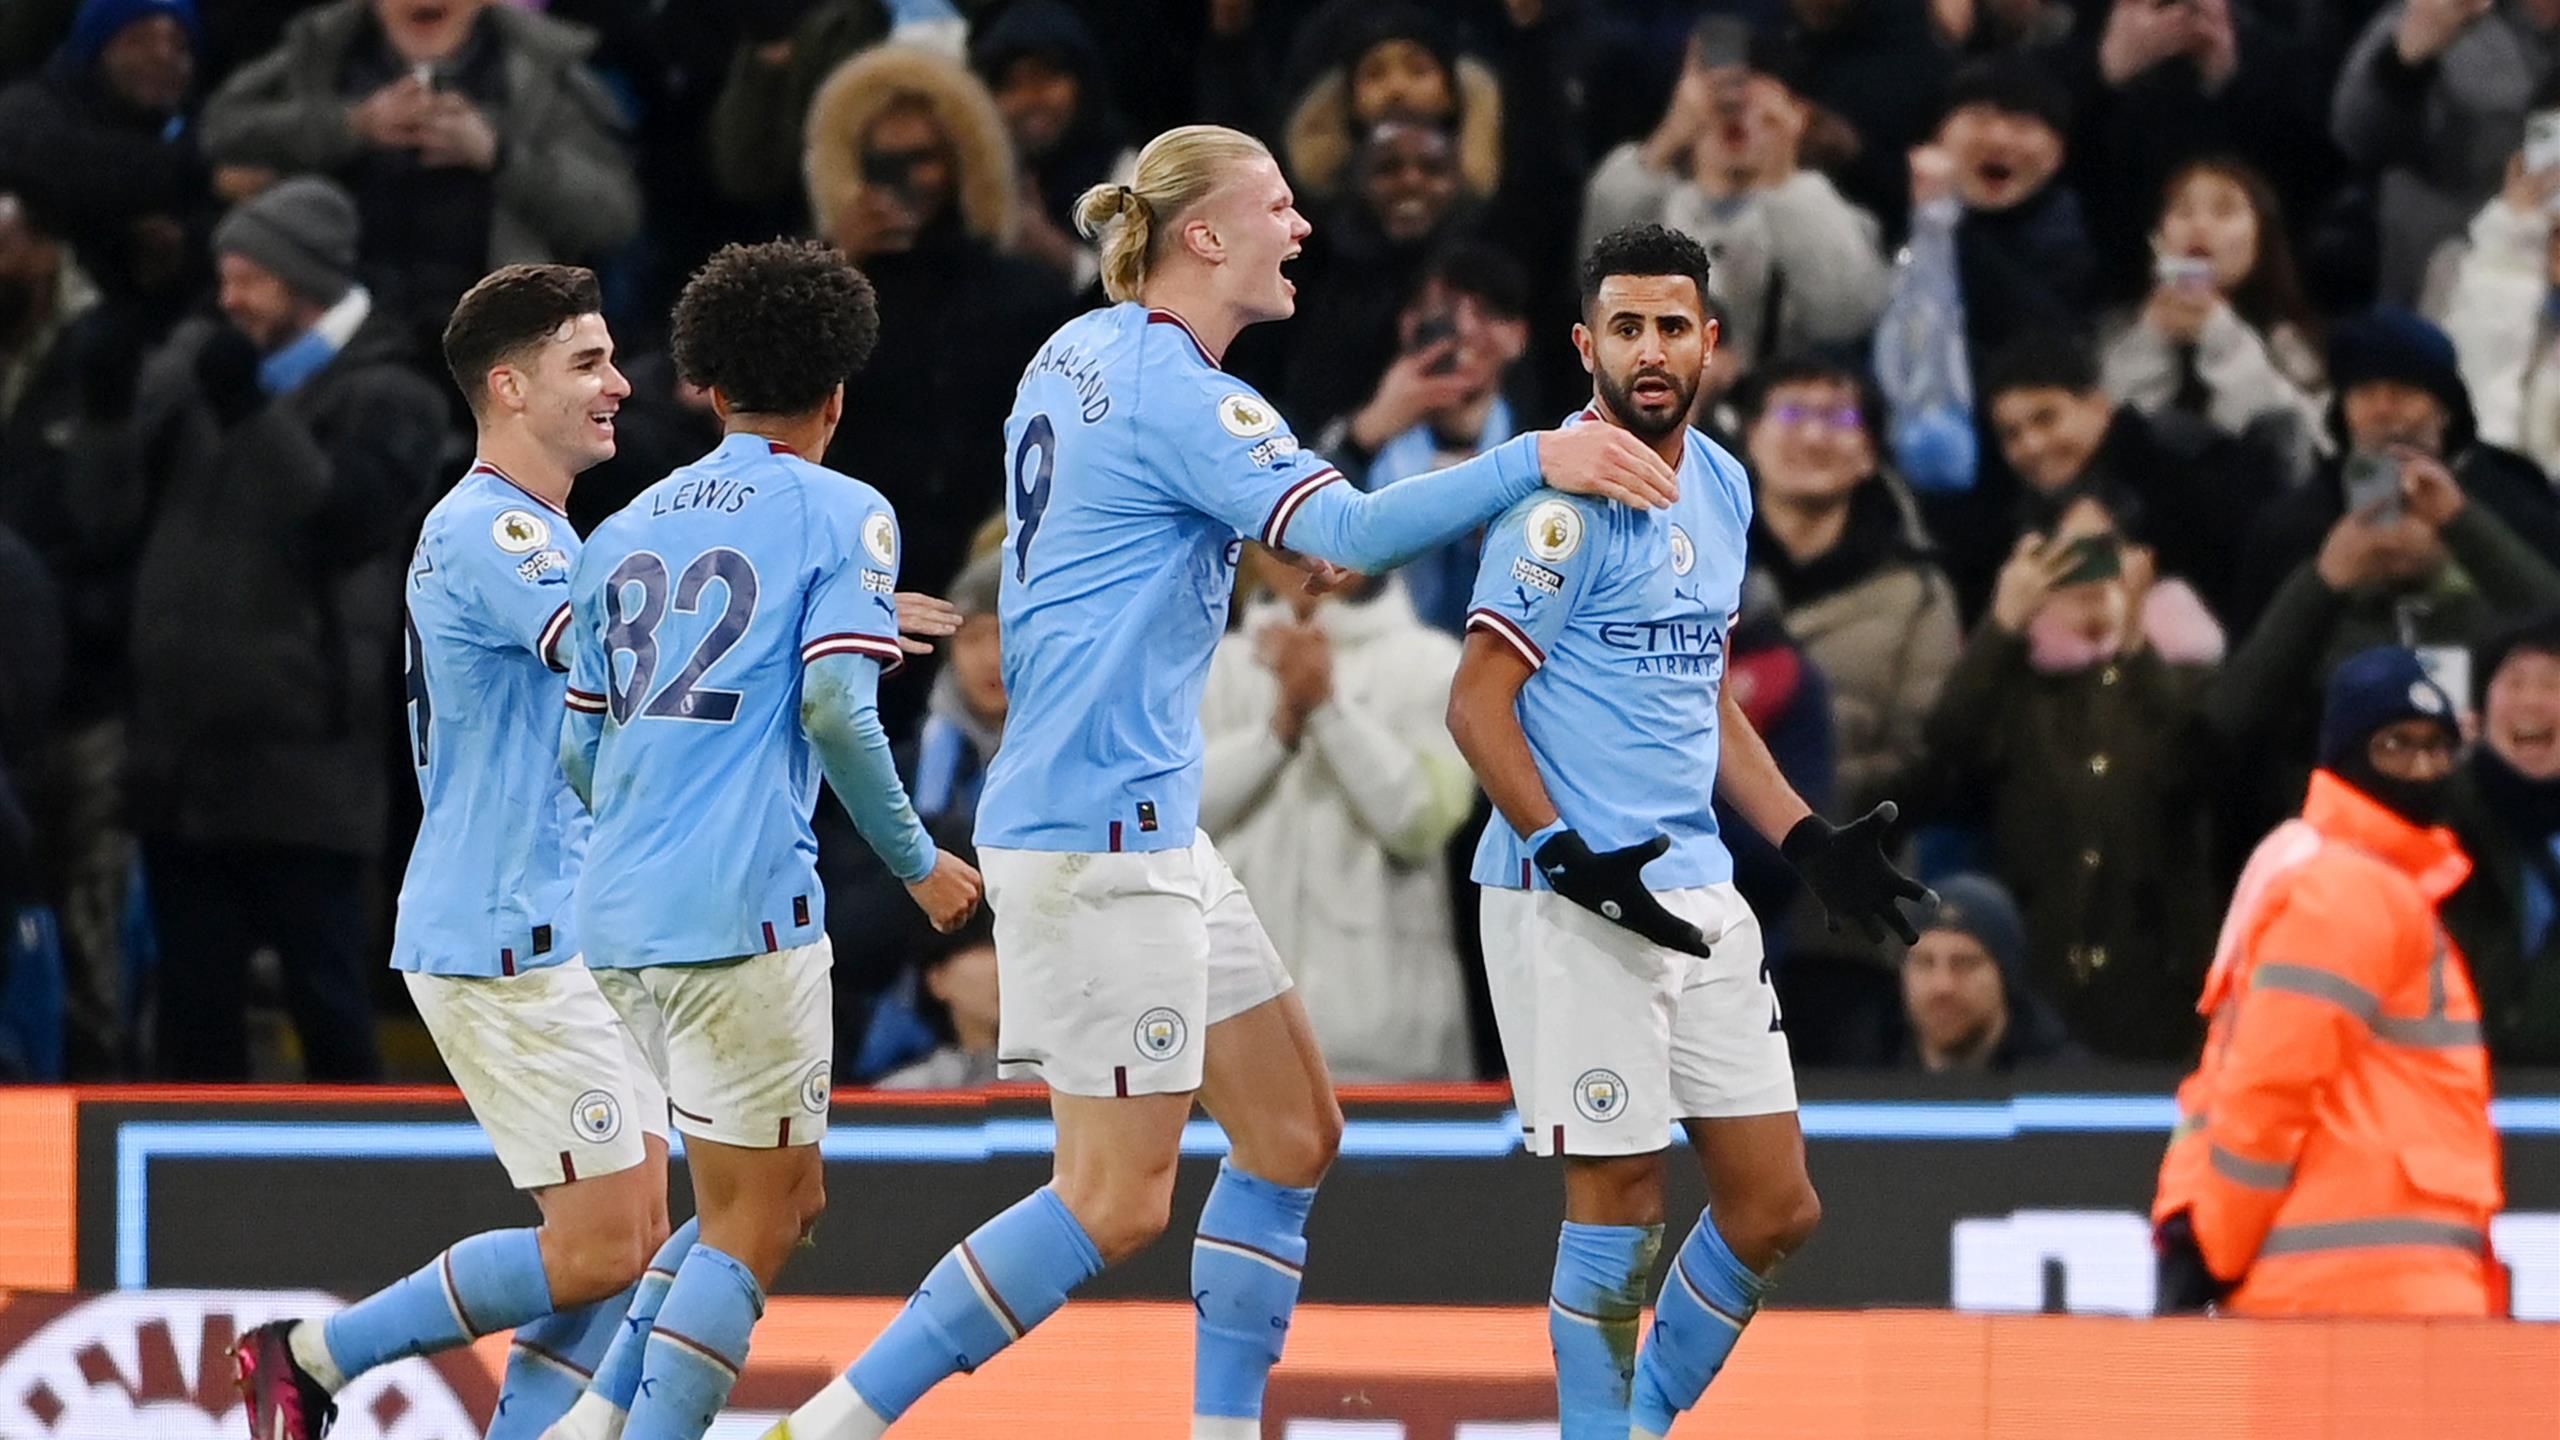 Manchester City 4-2 Tottenham Hotspur Erling Haaland scores, Riyad Mahrez gets double to complete stunning comeback win